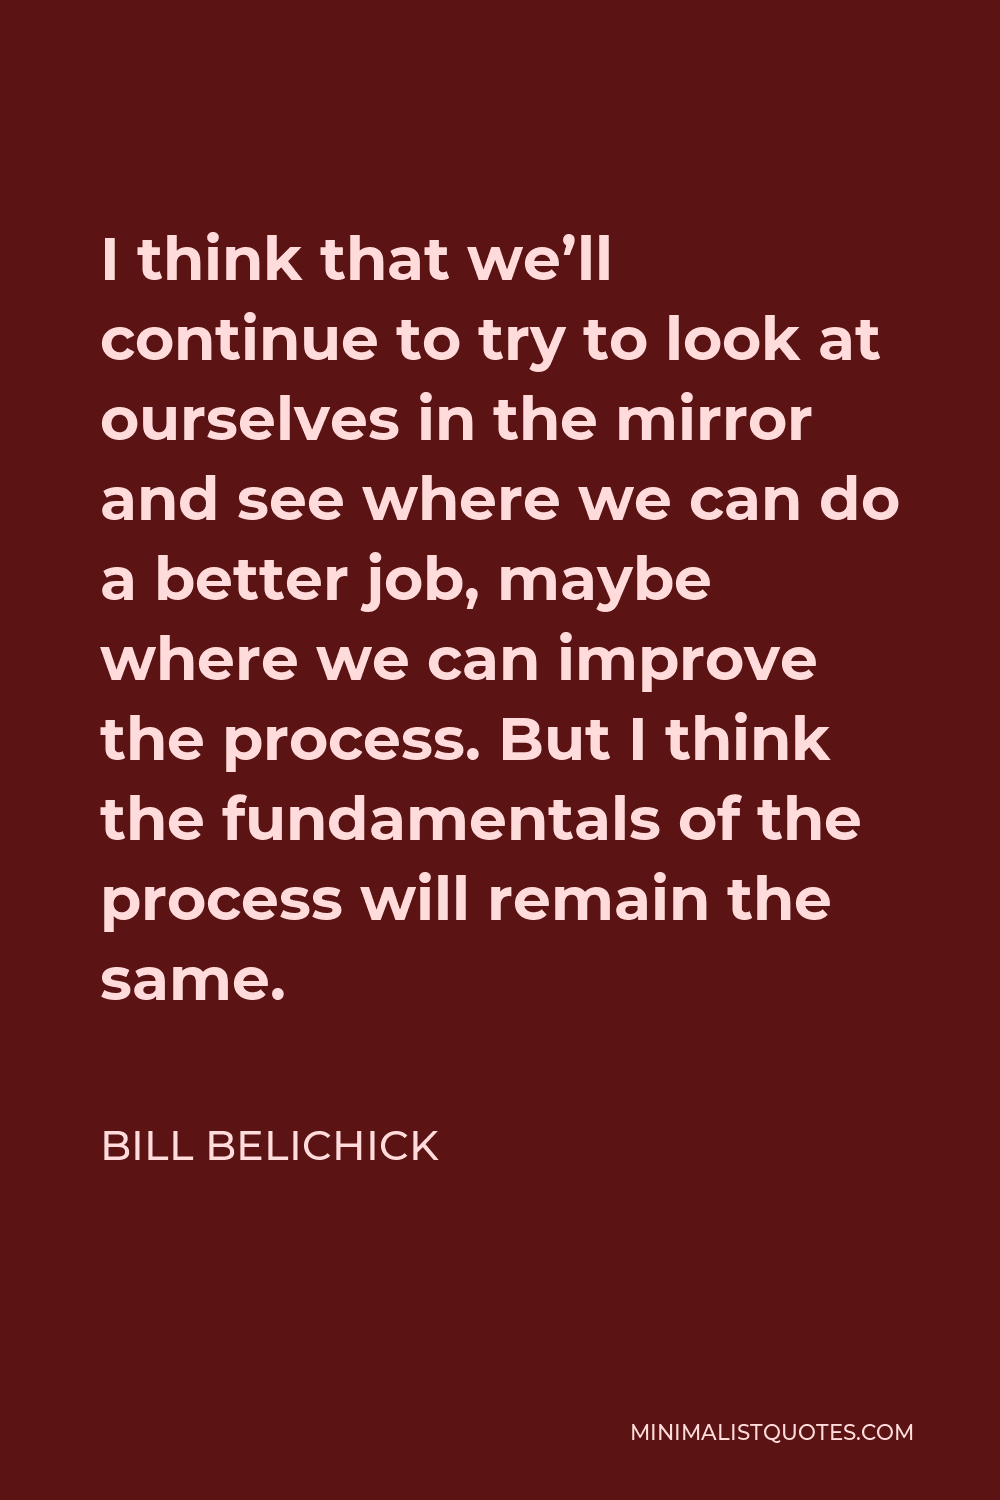 Bill Belichick Quote - I think that we’ll continue to try to look at ourselves in the mirror and see where we can do a better job, maybe where we can improve the process. But I think the fundamentals of the process will remain the same.